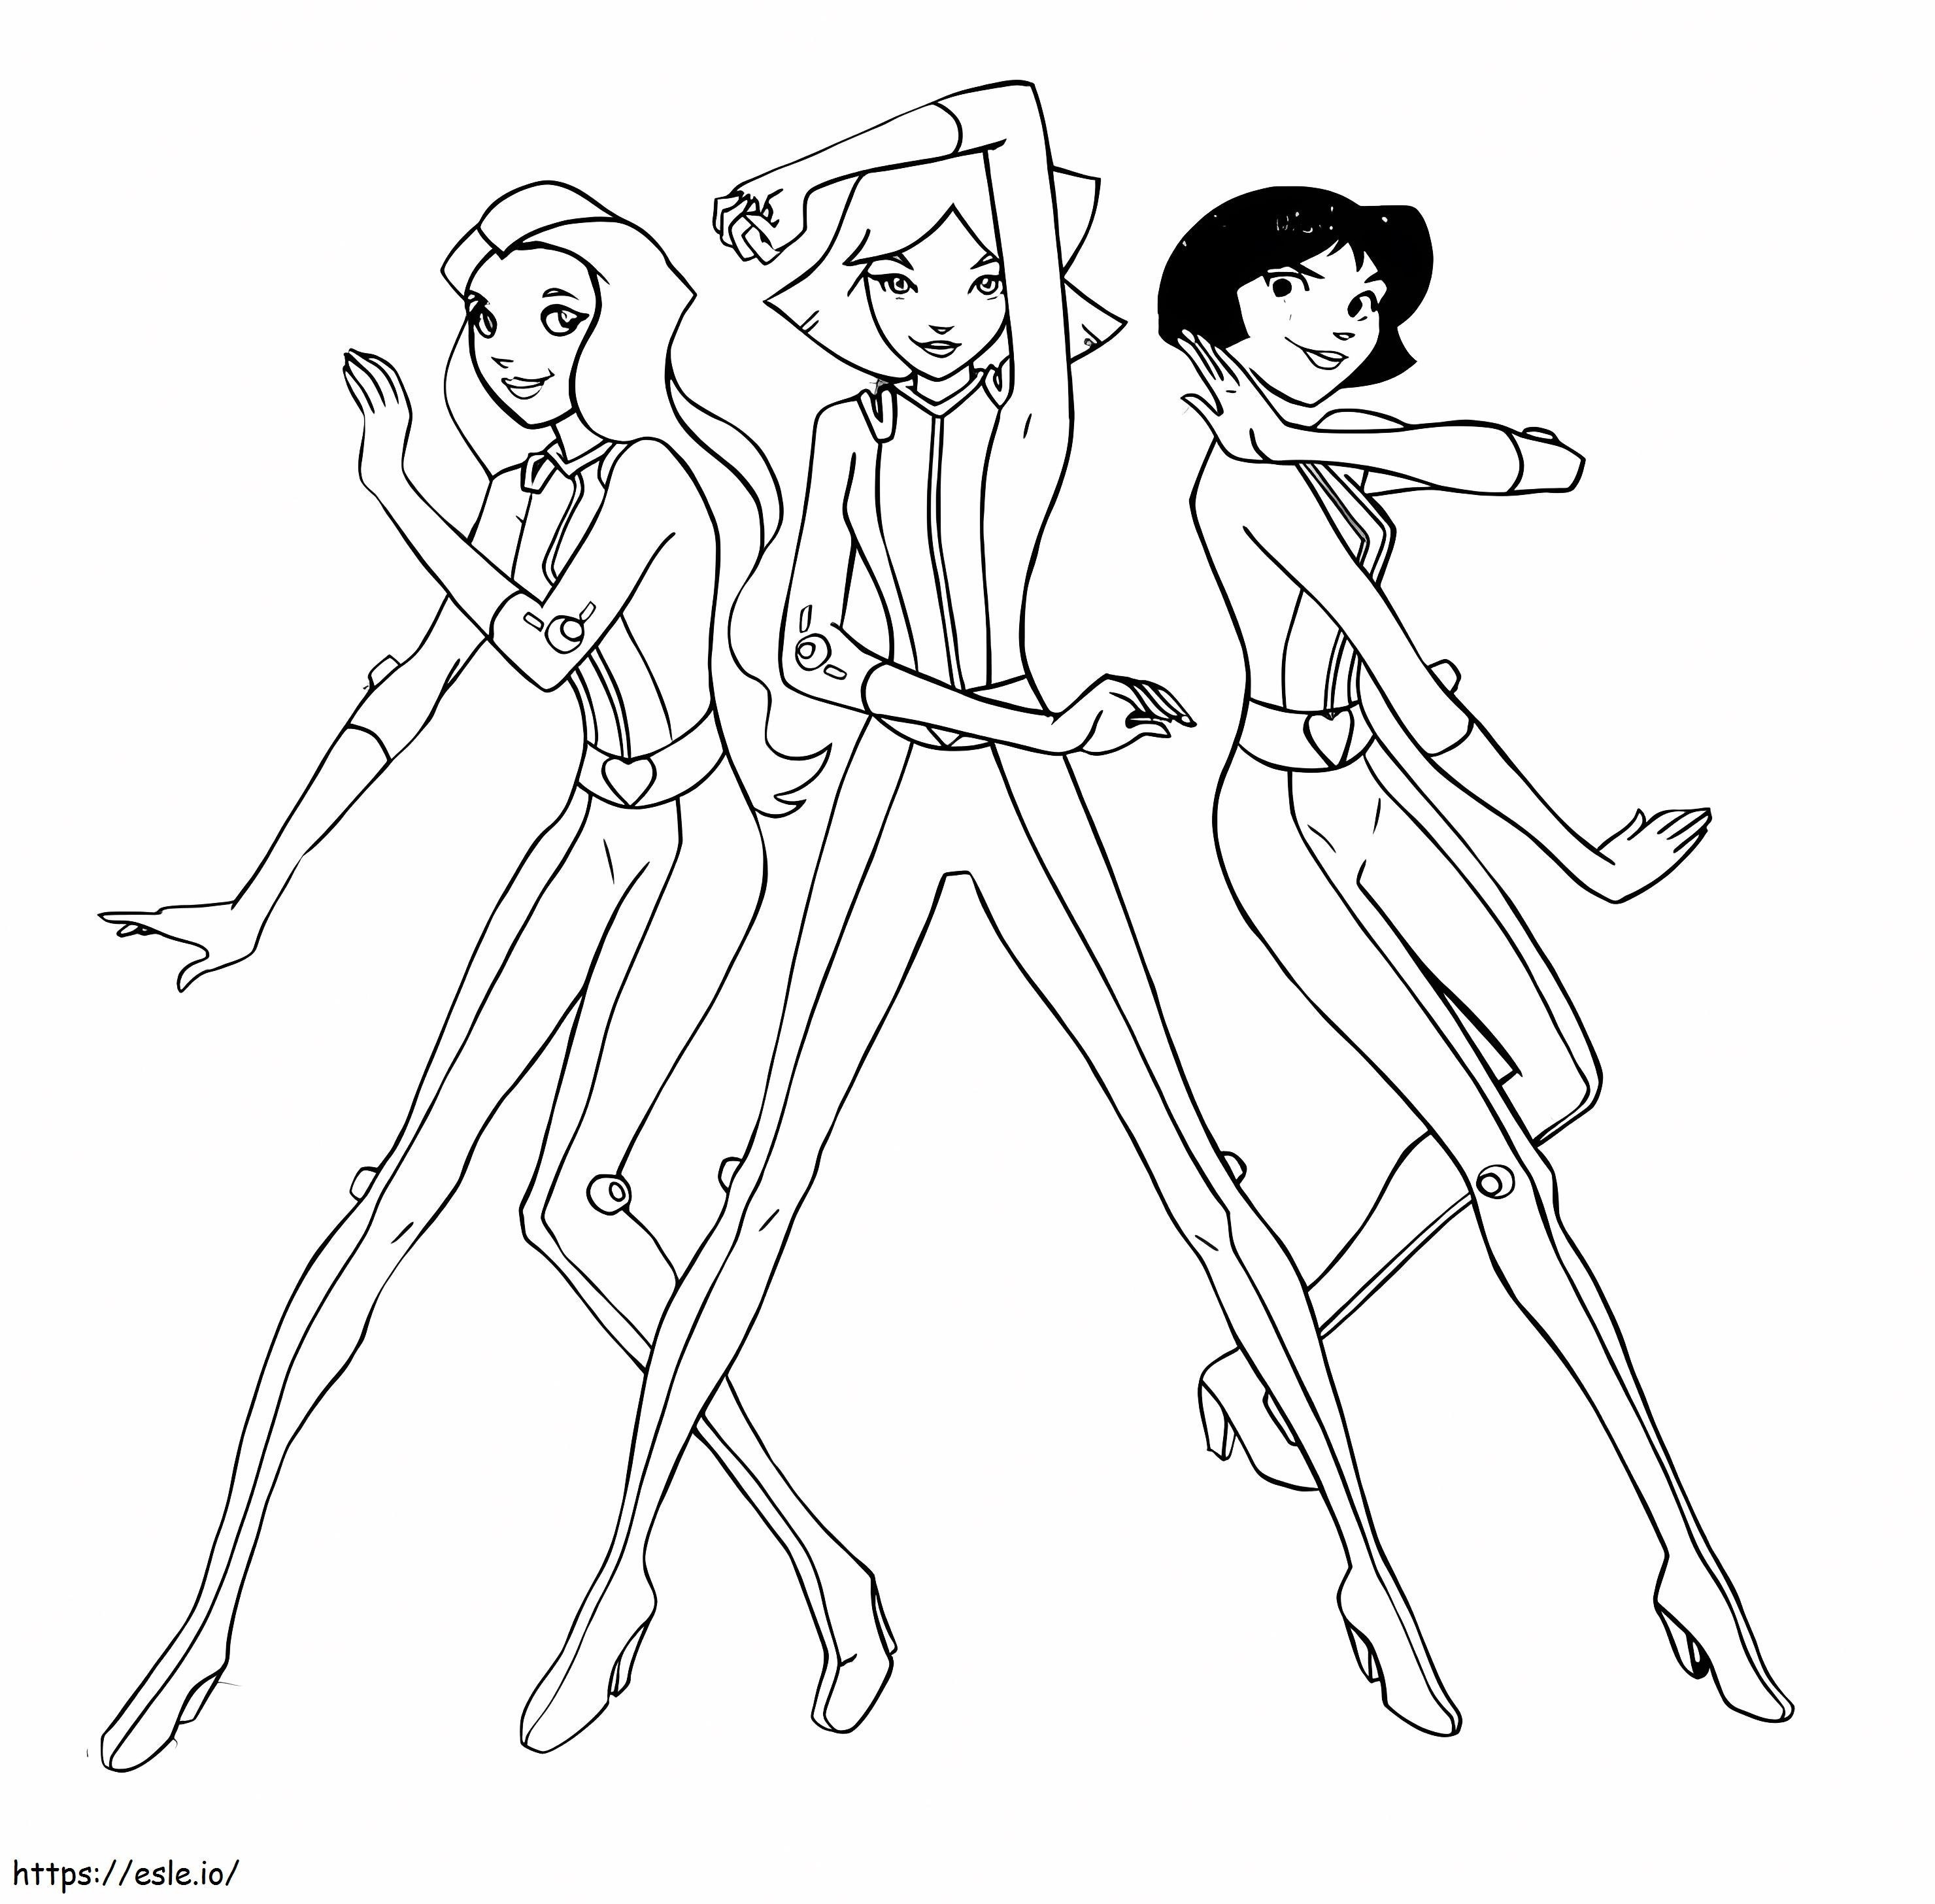 Totally Spies coloring page